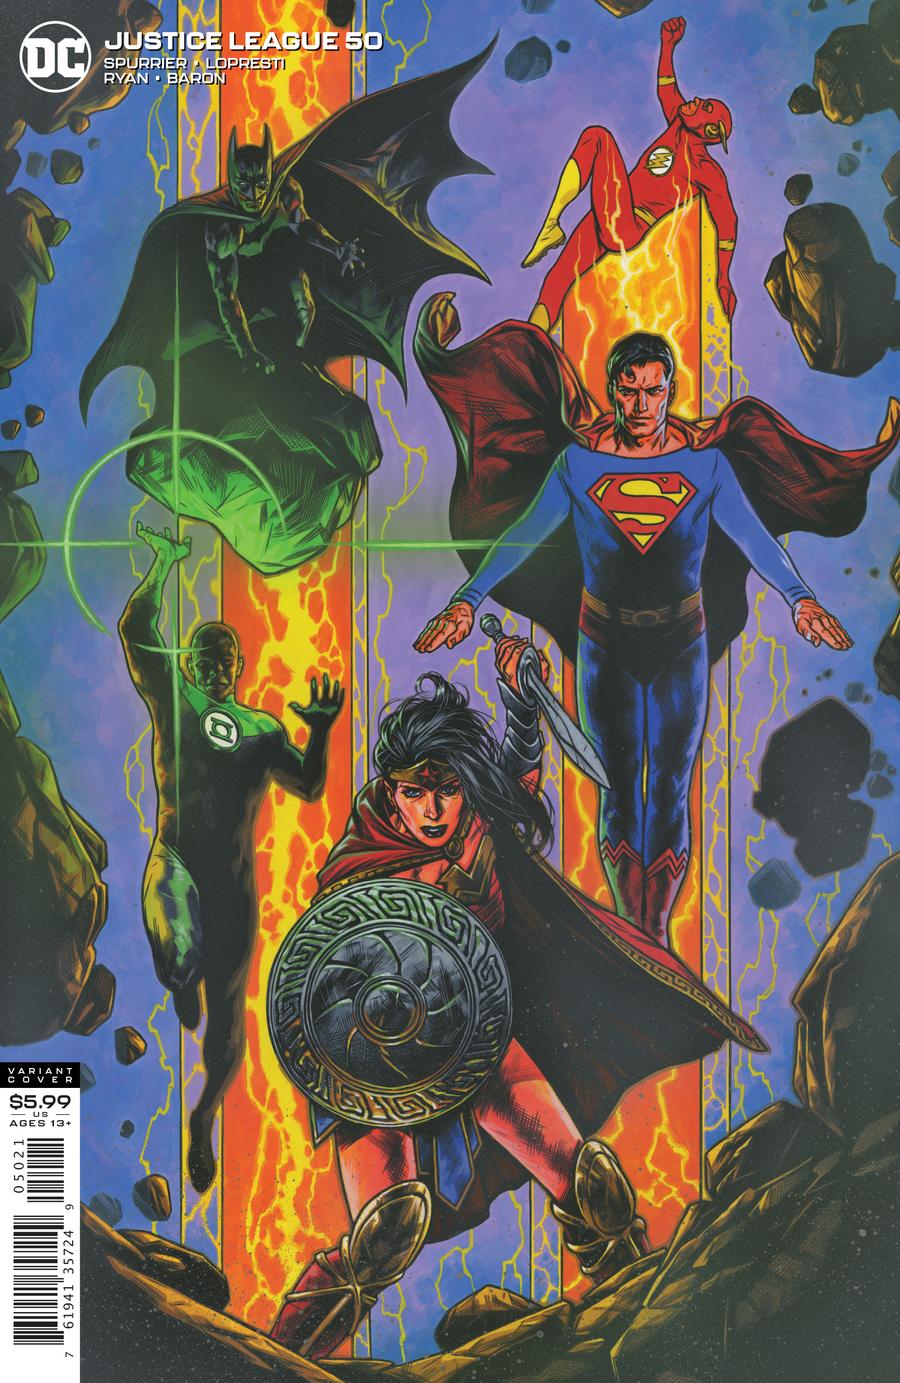 Justice League 50 - Heroes Cave